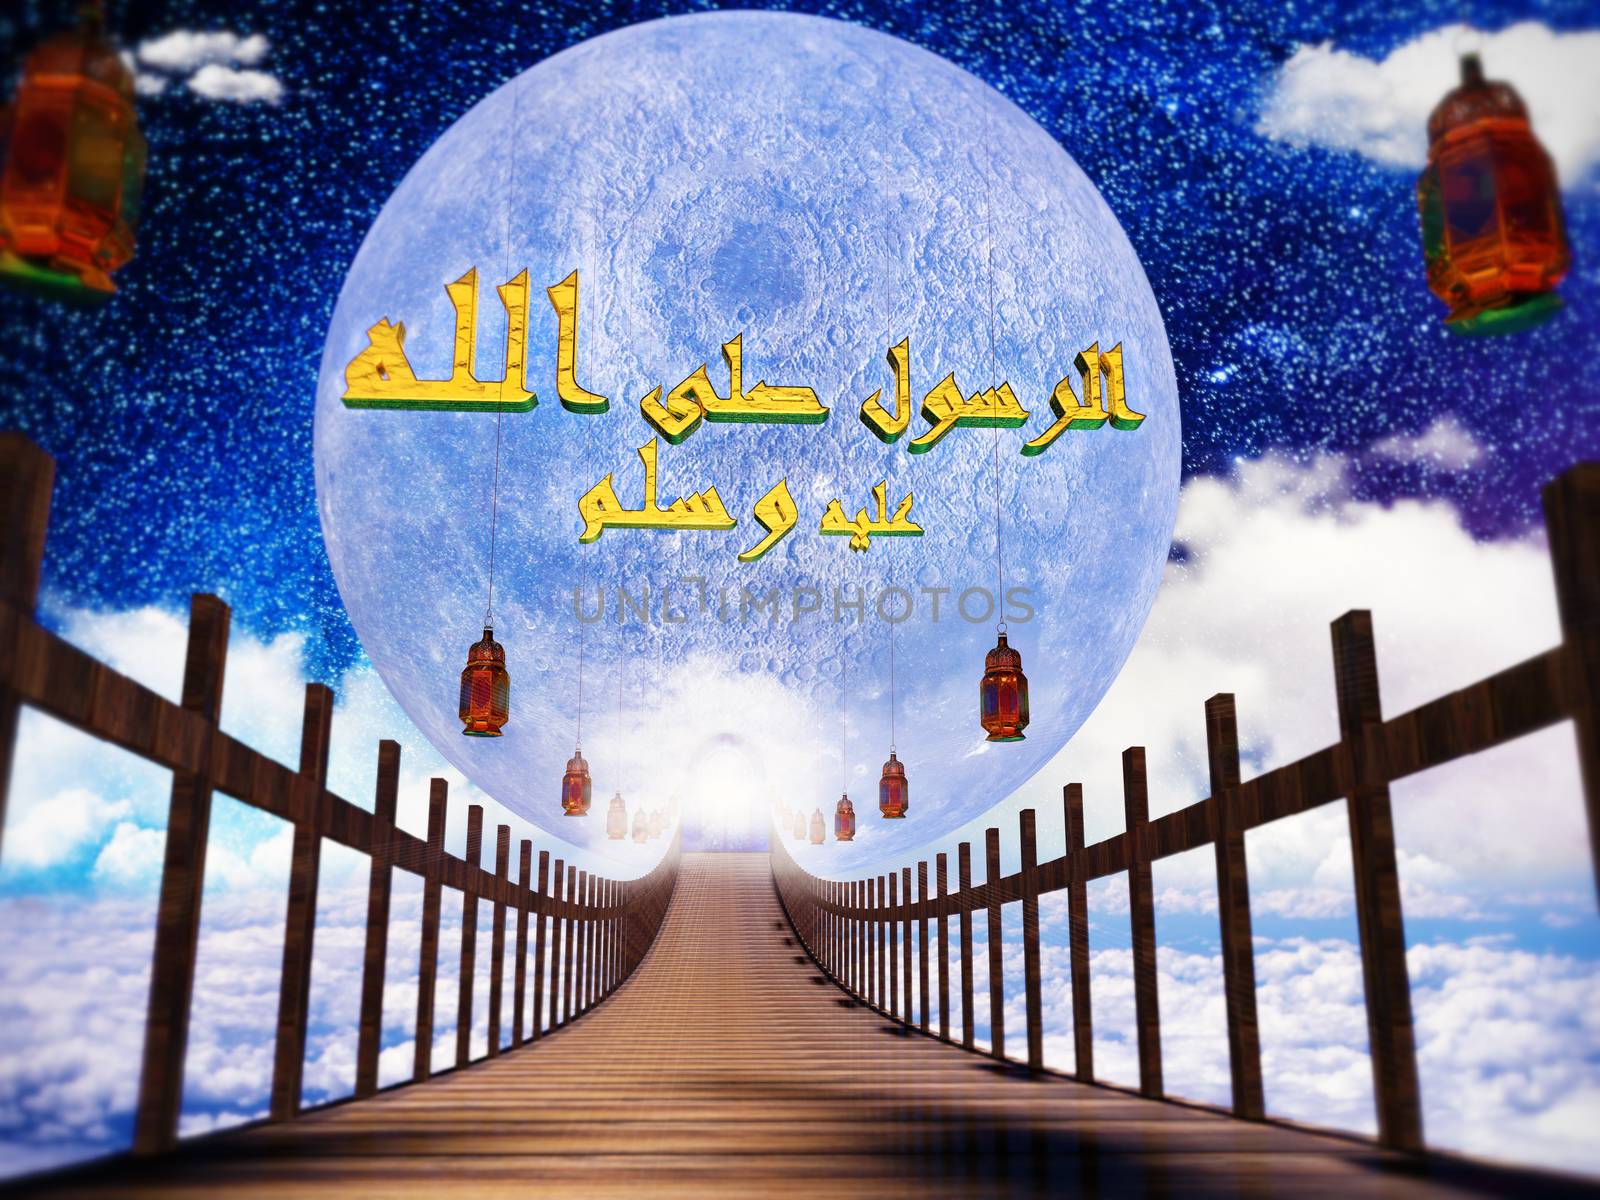 3d  scene for islamic Eid Mubarak or other events | translation is: MProphet Muhammad, peace be upon him